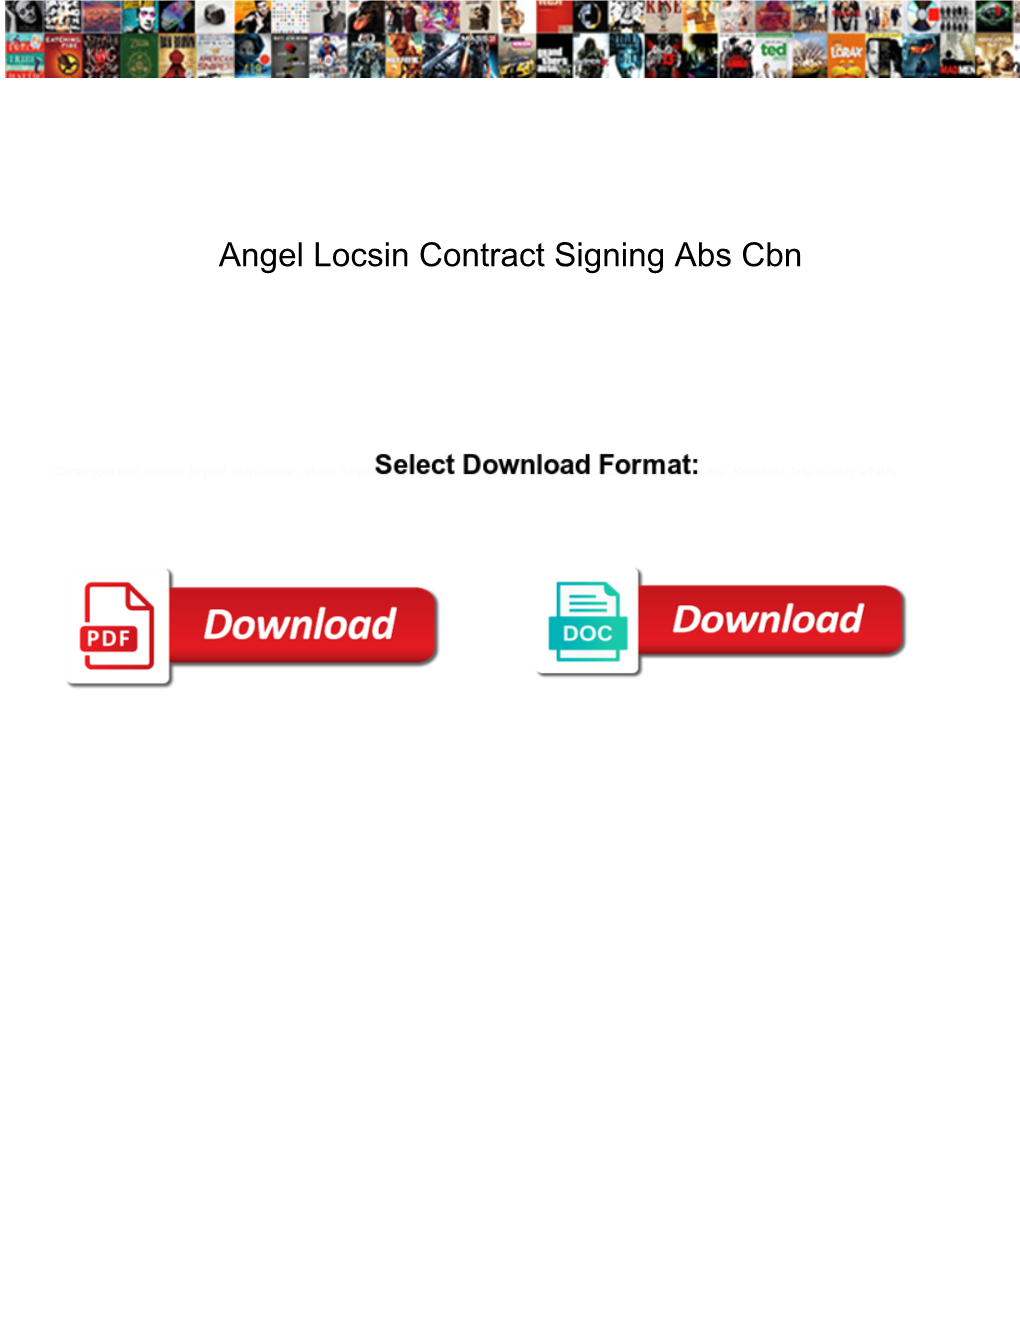 Angel Locsin Contract Signing Abs Cbn